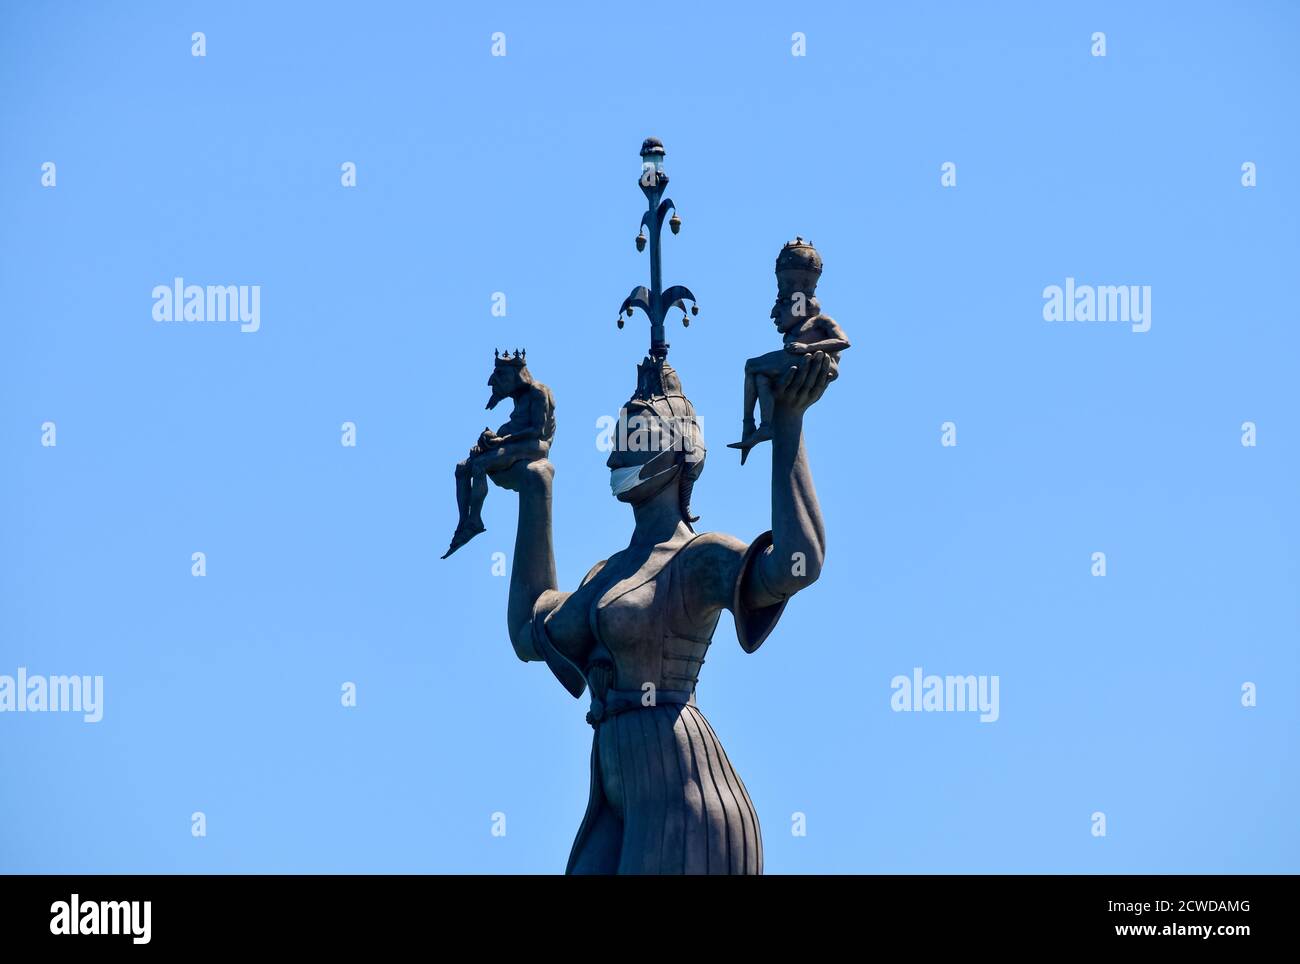 Konstanz, Germany - May 27, 2020: Imperia statue at the entrance of the harbour of Konstanz with medical mask in Coronavirus time. Stock Photo